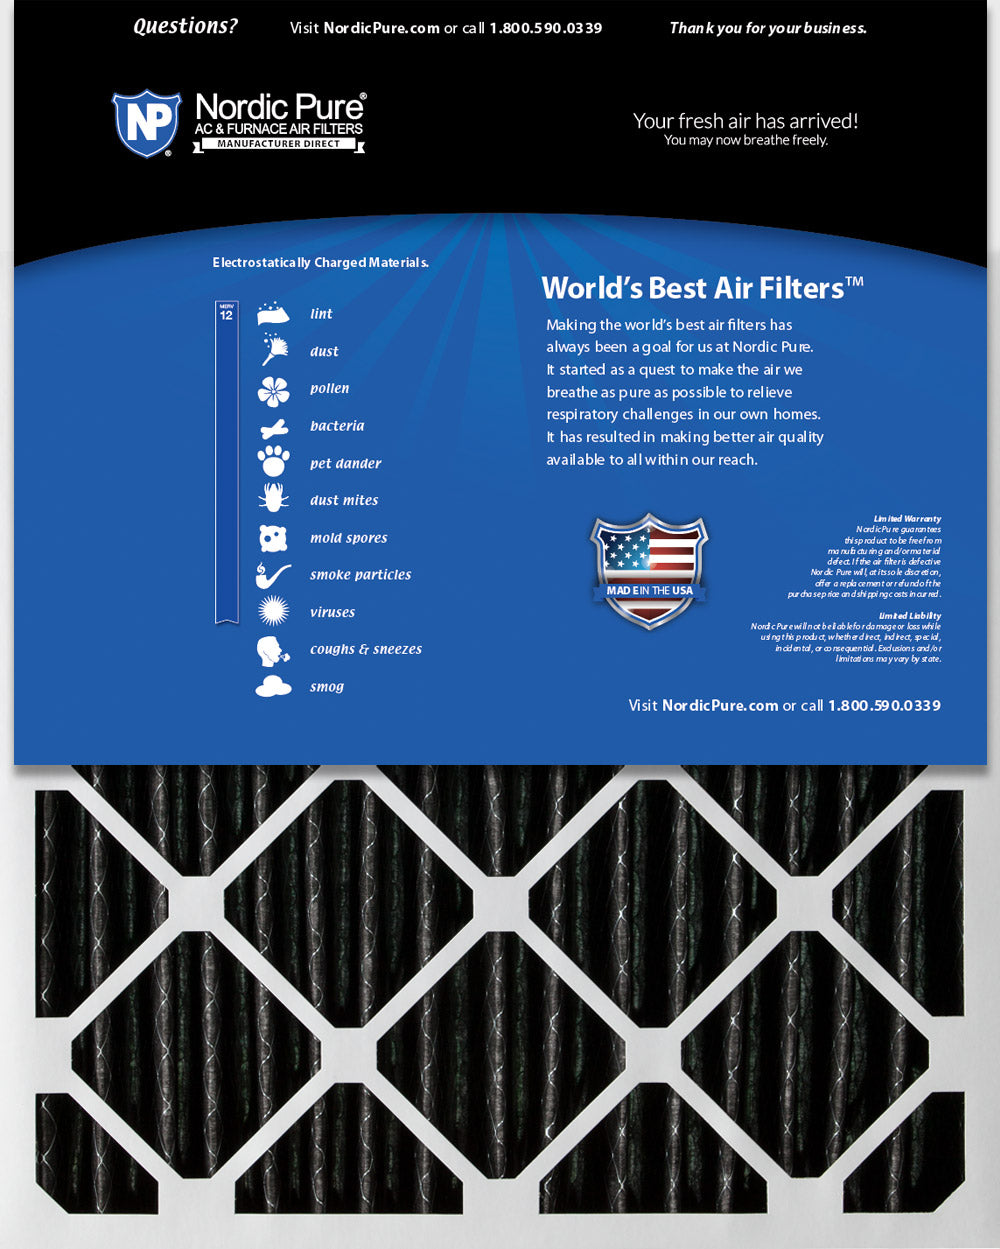 16x24x2 Furnace Air Filters MERV 12 Pleated Plus Carbon